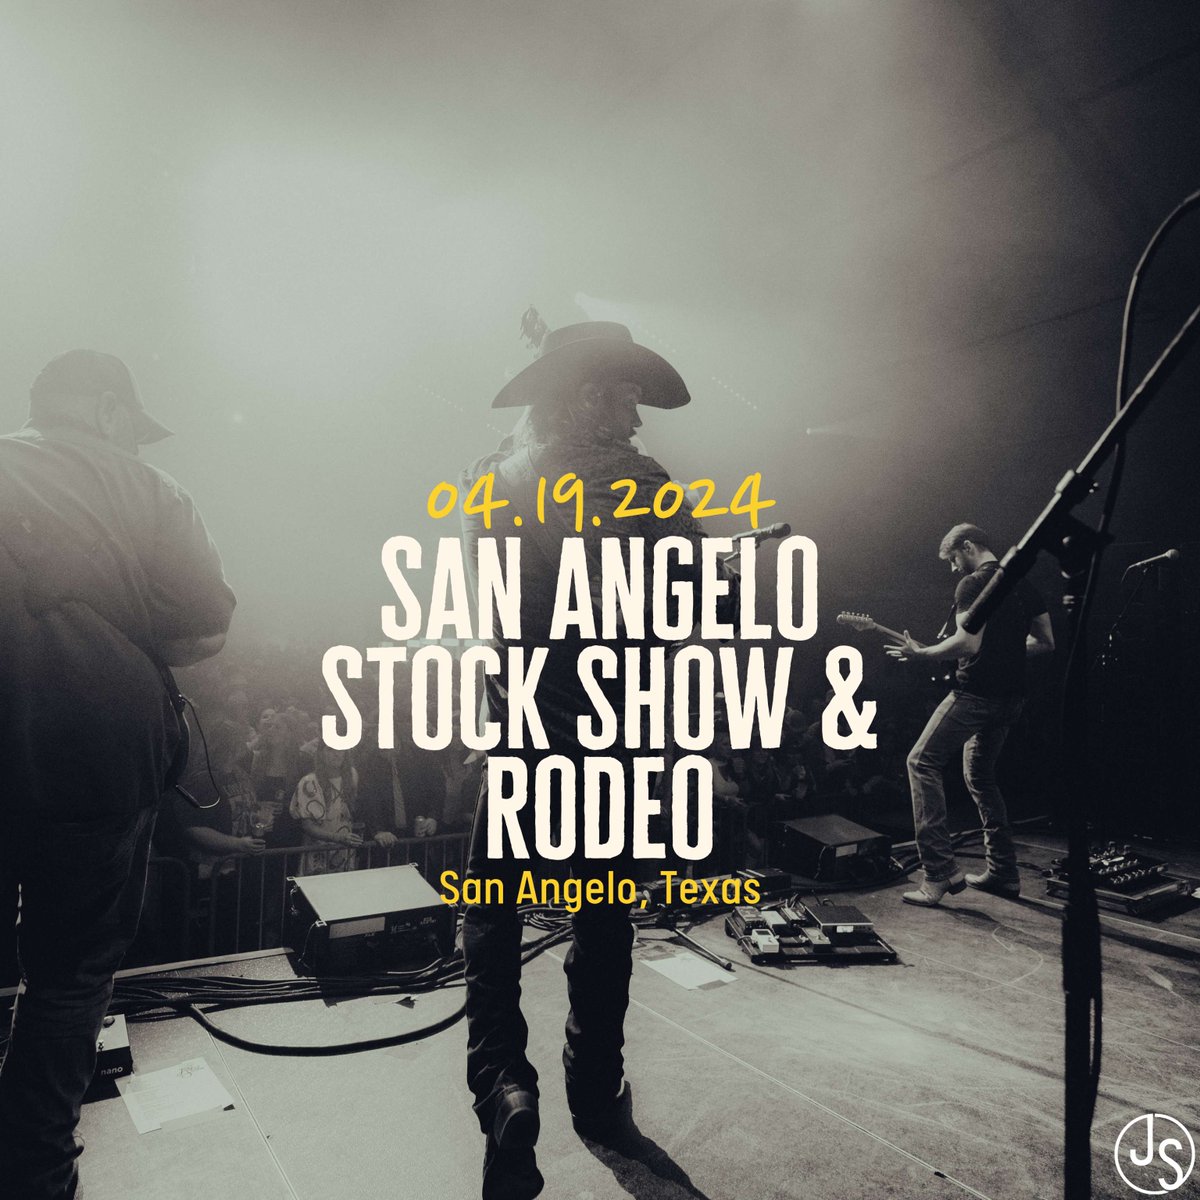 Just Announced! San Angelo - we are headed your way.. Free show with admission to fairgrounds. Better mark your 📅!